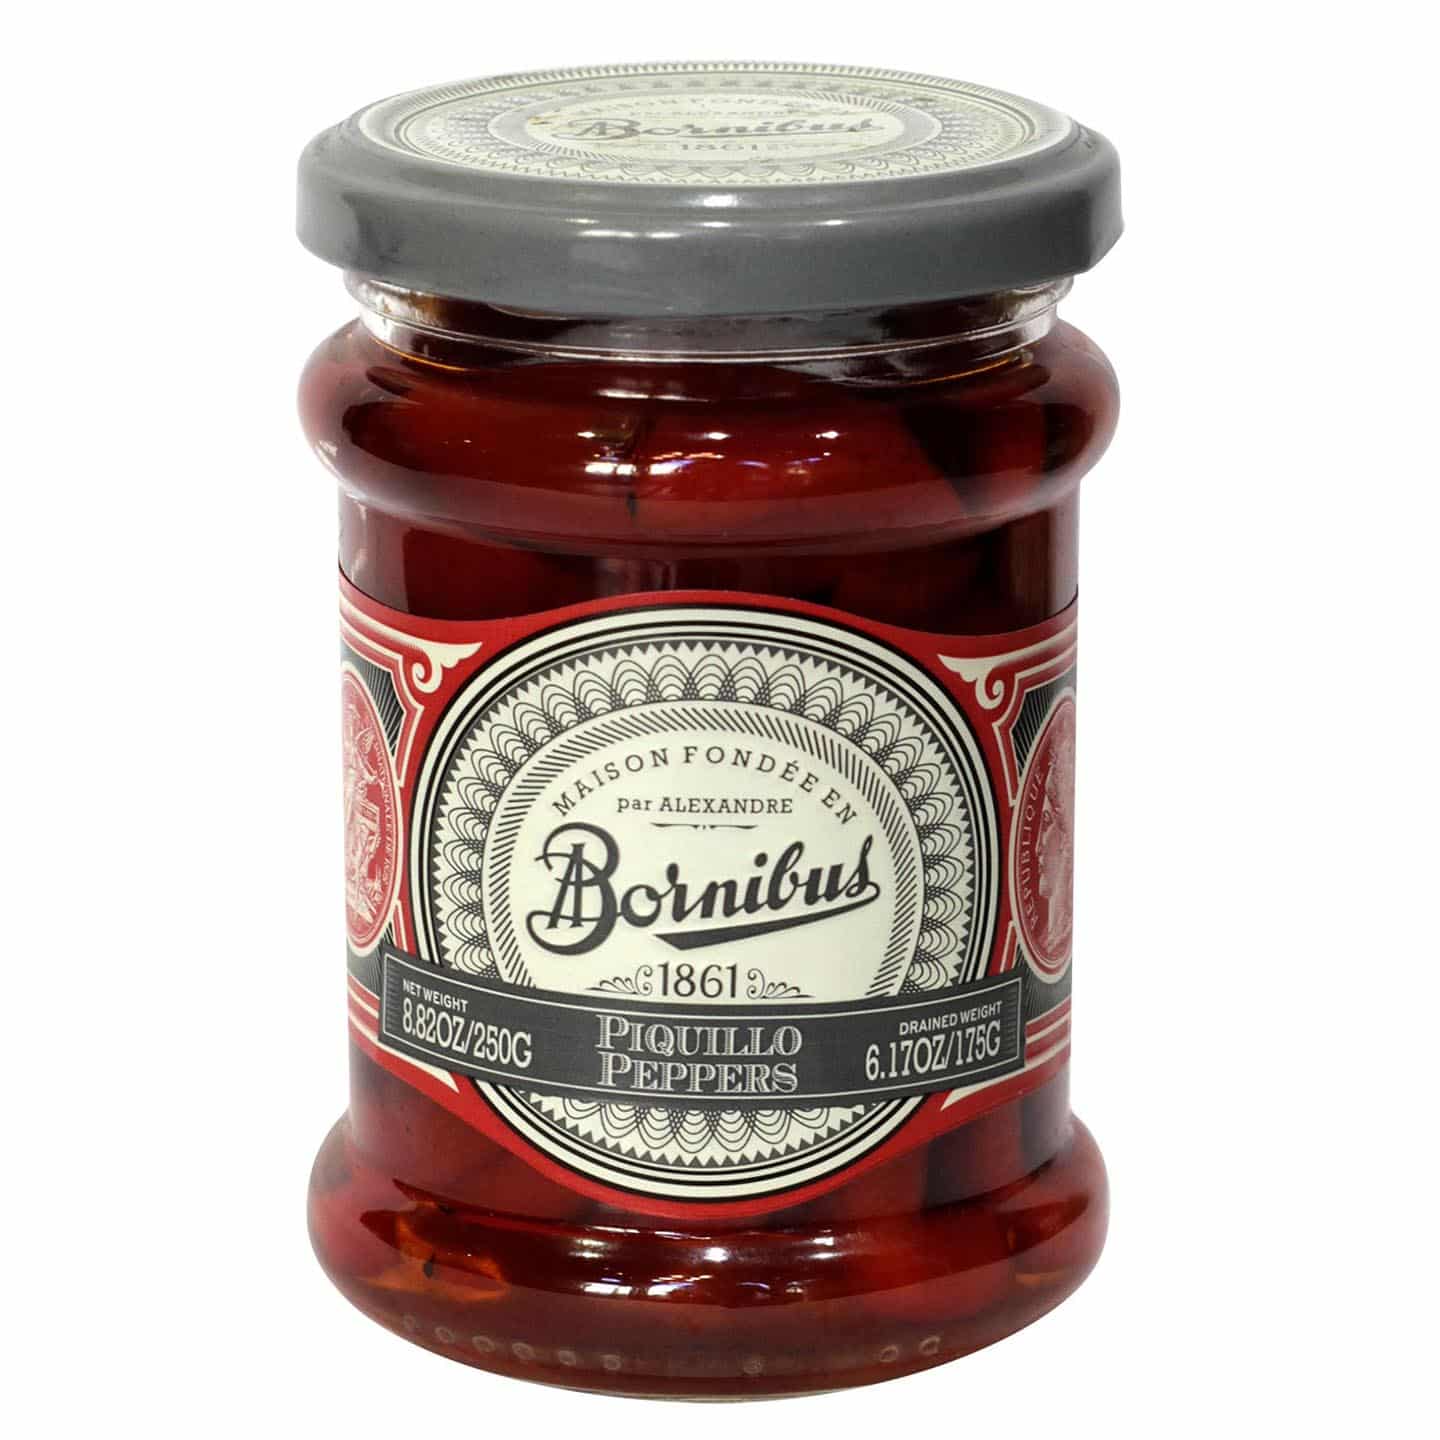 BS1609---Piquillo-peppers